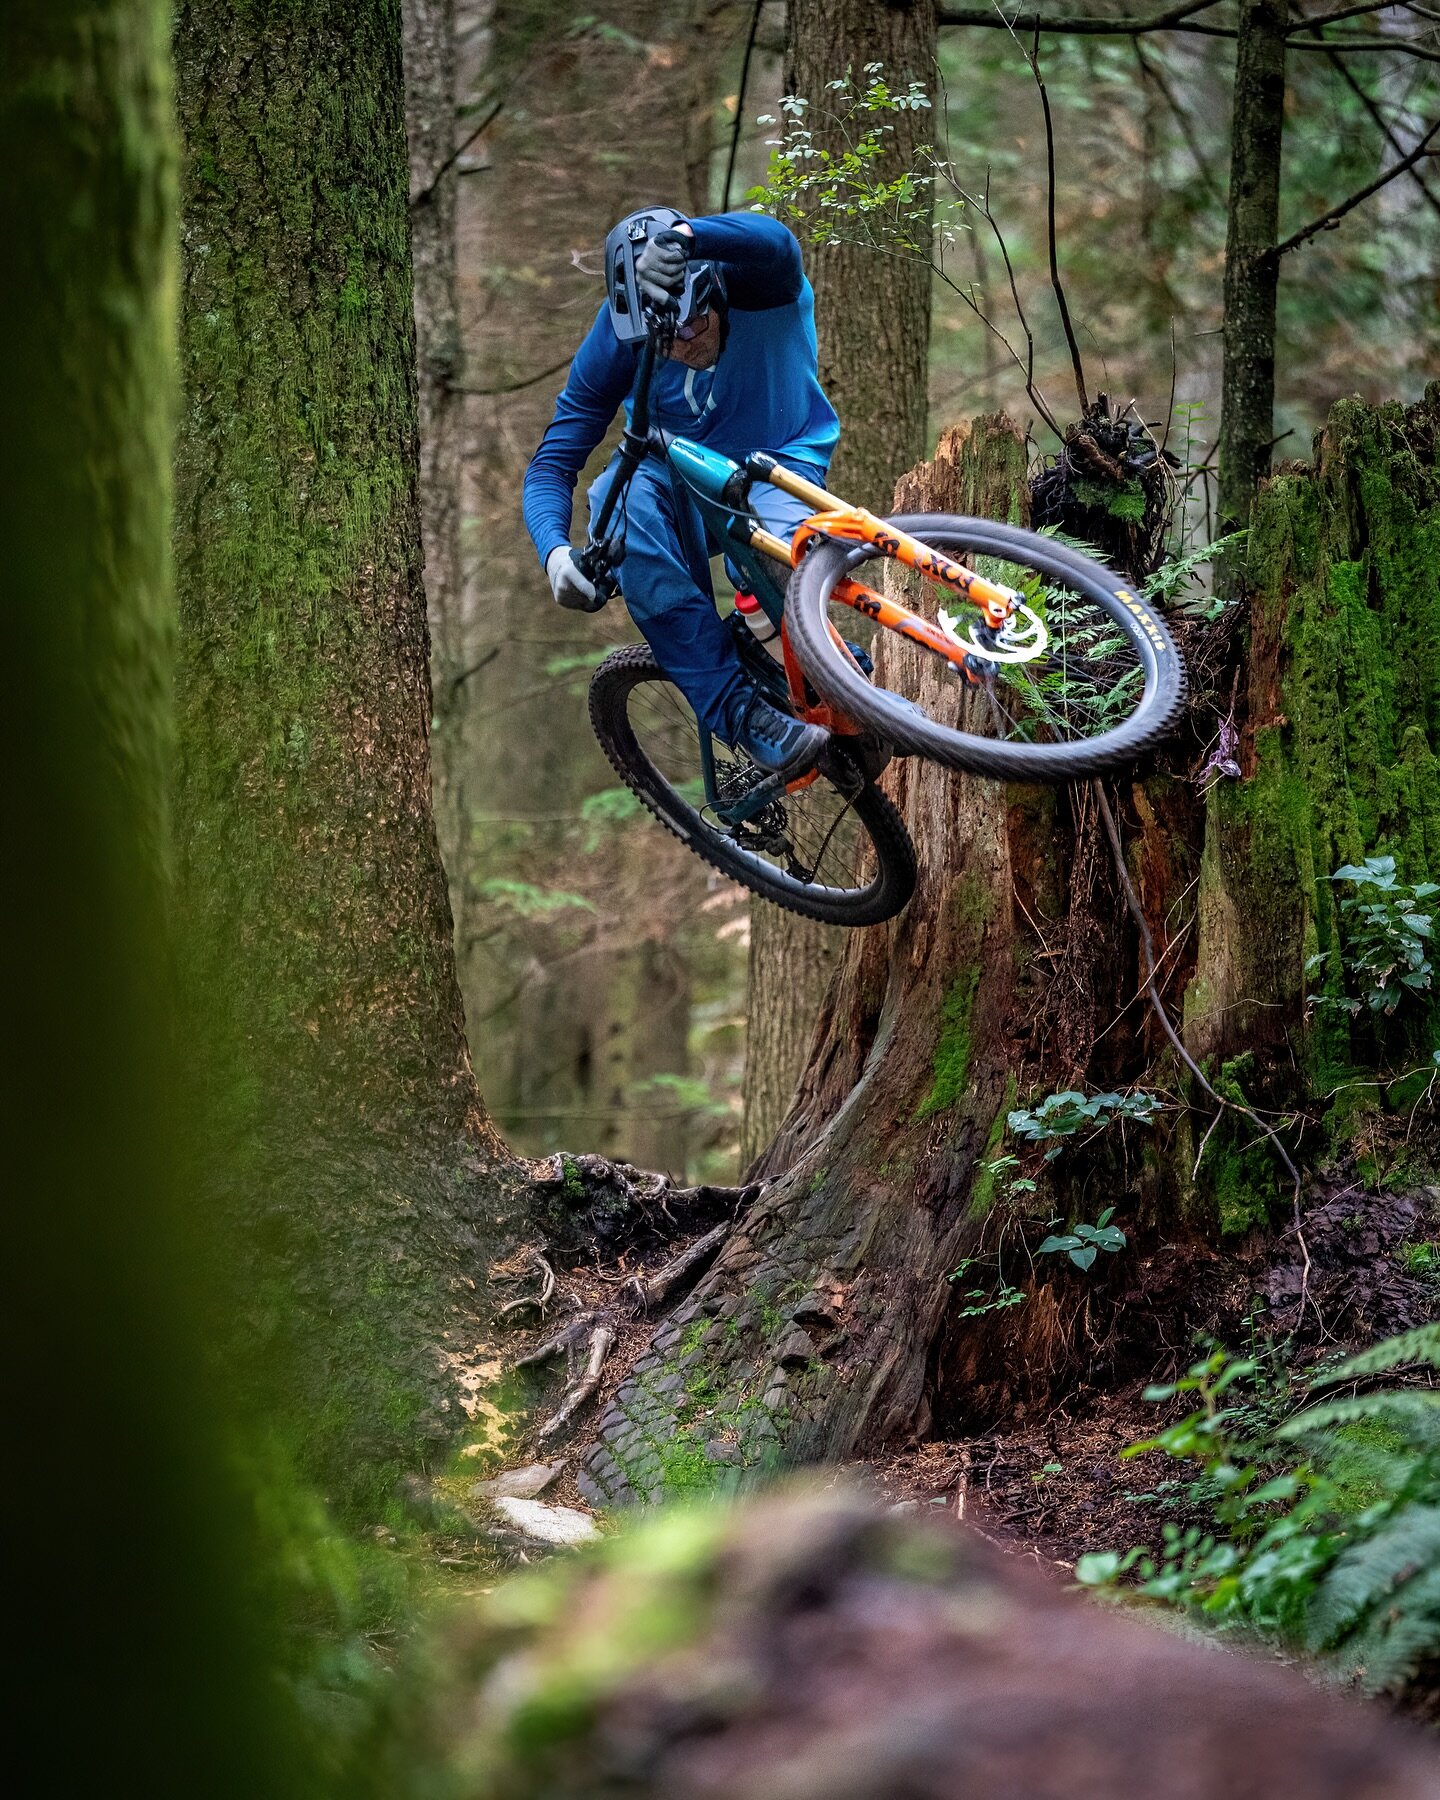 Squeezing all the fun out of &ldquo;Boogie man&rdquo;
📷 @fruitsnackzach 
@orbea @norrona @alpina_sports @fox 
#bikes #ebike #freeride #northshore #vancouver #outdoor #mountain #stpatricksday